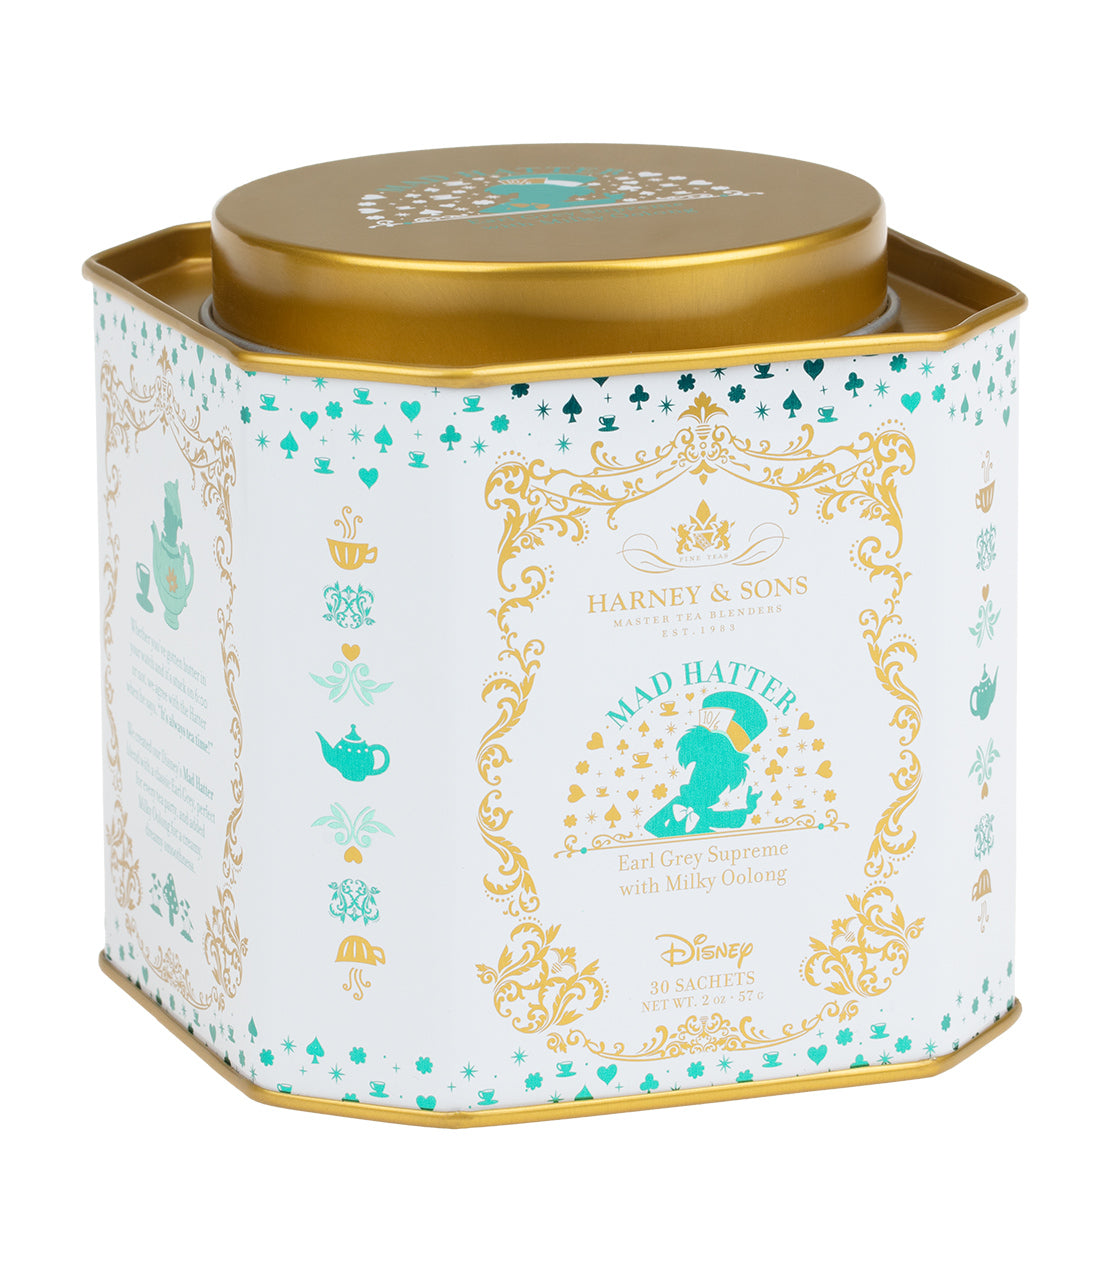 The Disney Collection - Harney & Sons Fine Teas